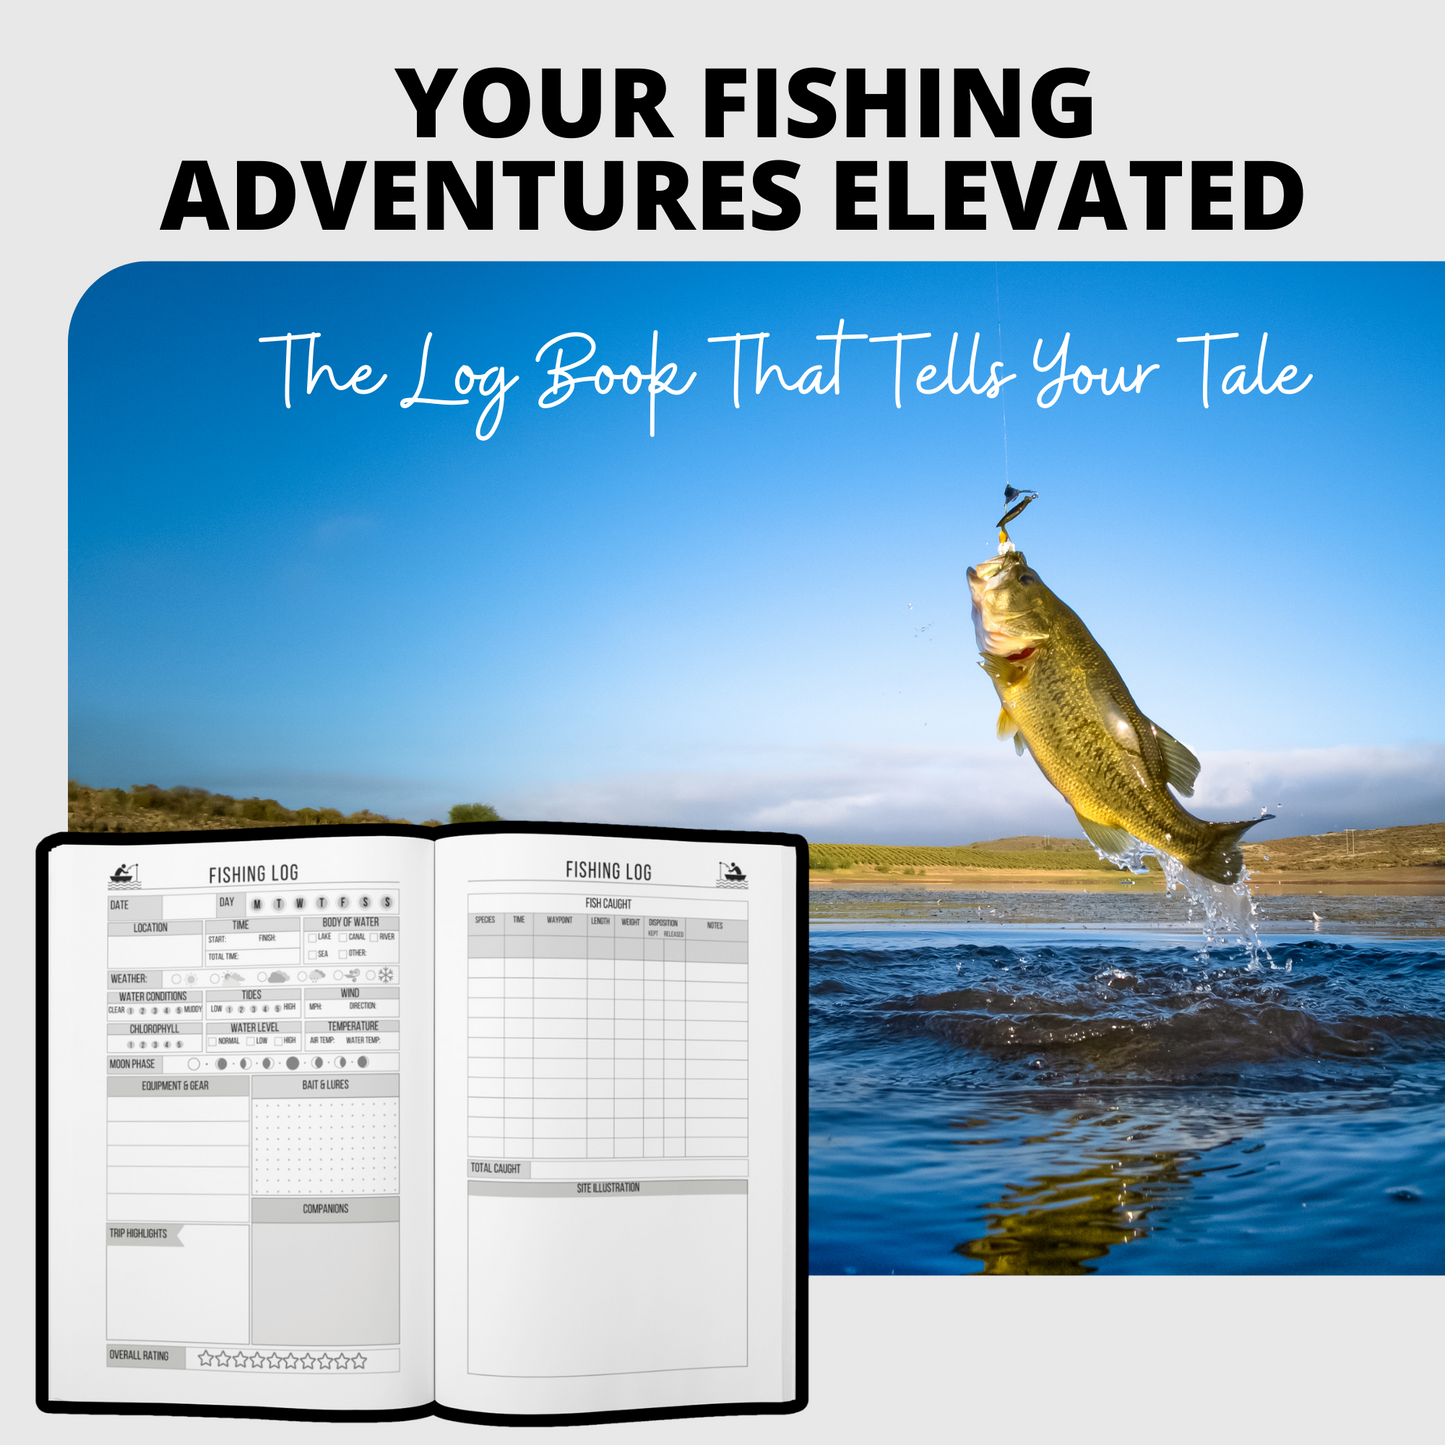 i'm just happier person when i'm fihsing: Fishing log book - Notebook For  The Serious Fisherman To Record Fishing Trip Experiences by 